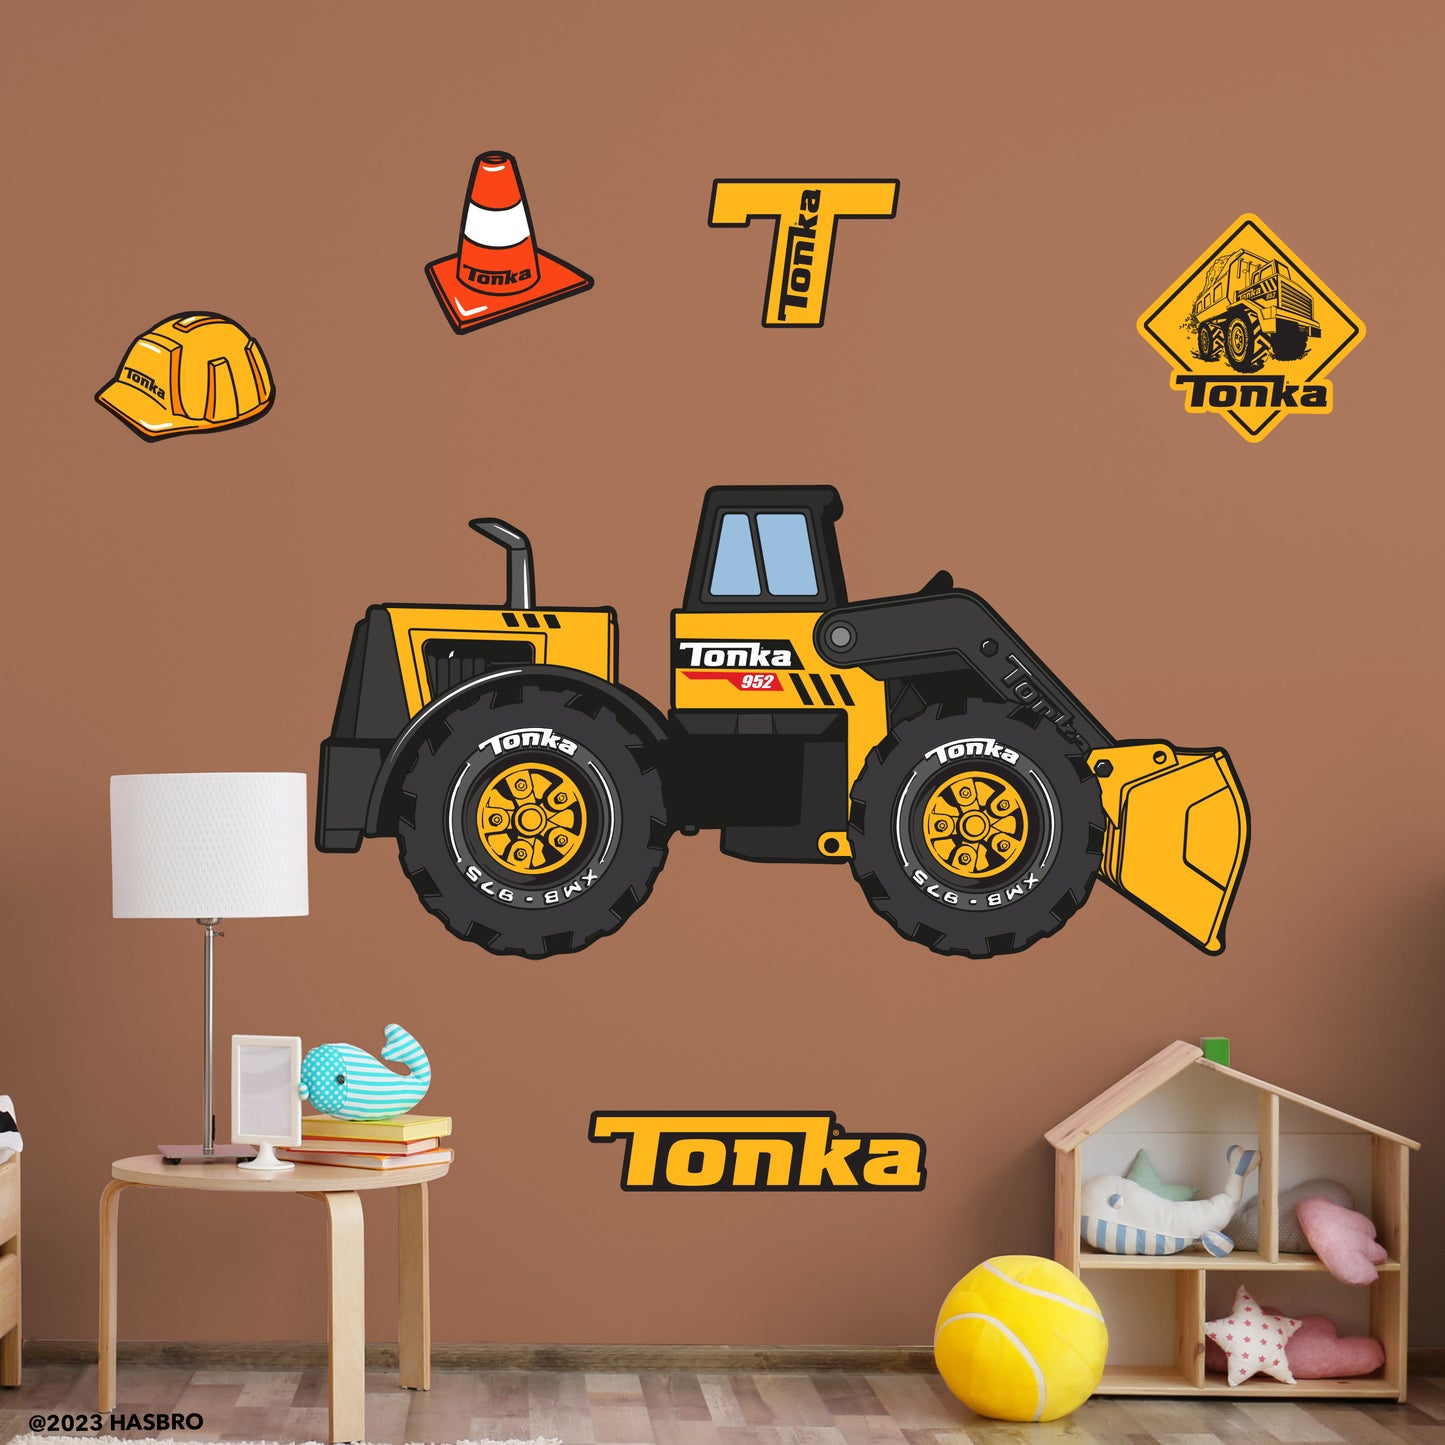 Tonka Trucks: Frontloader Classic RealBig        - Officially Licensed Hasbro Removable     Adhesive Decal